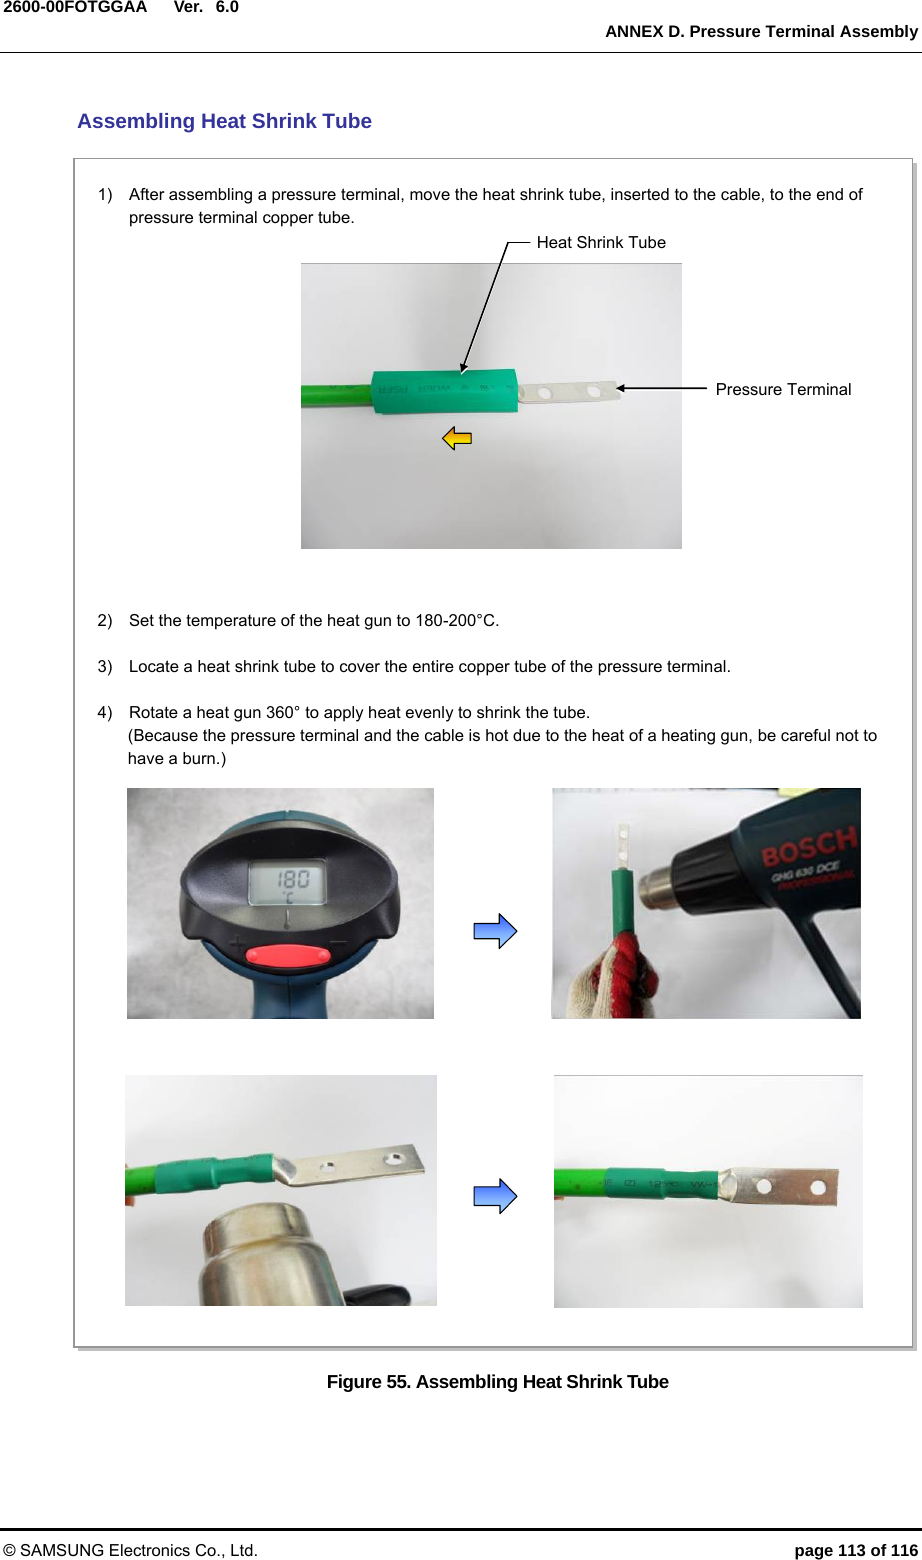  Ver.  ANNEX D. Pressure Terminal Assembly © SAMSUNG Electronics Co., Ltd.  page 113 of 116 2600-00FOTGGAA 6.0 Assembling Heat Shrink Tube Figure 55. Assembling Heat Shrink Tube  2)    Set the temperature of the heat gun to 180-200°C.  3)    Locate a heat shrink tube to cover the entire copper tube of the pressure terminal.  4)    Rotate a heat gun 360° to apply heat evenly to shrink the tube. (Because the pressure terminal and the cable is hot due to the heat of a heating gun, be careful not to have a burn.)  1)    After assembling a pressure terminal, move the heat shrink tube, inserted to the cable, to the end of pressure terminal copper tube. Heat Shrink Tube Pressure Terminal